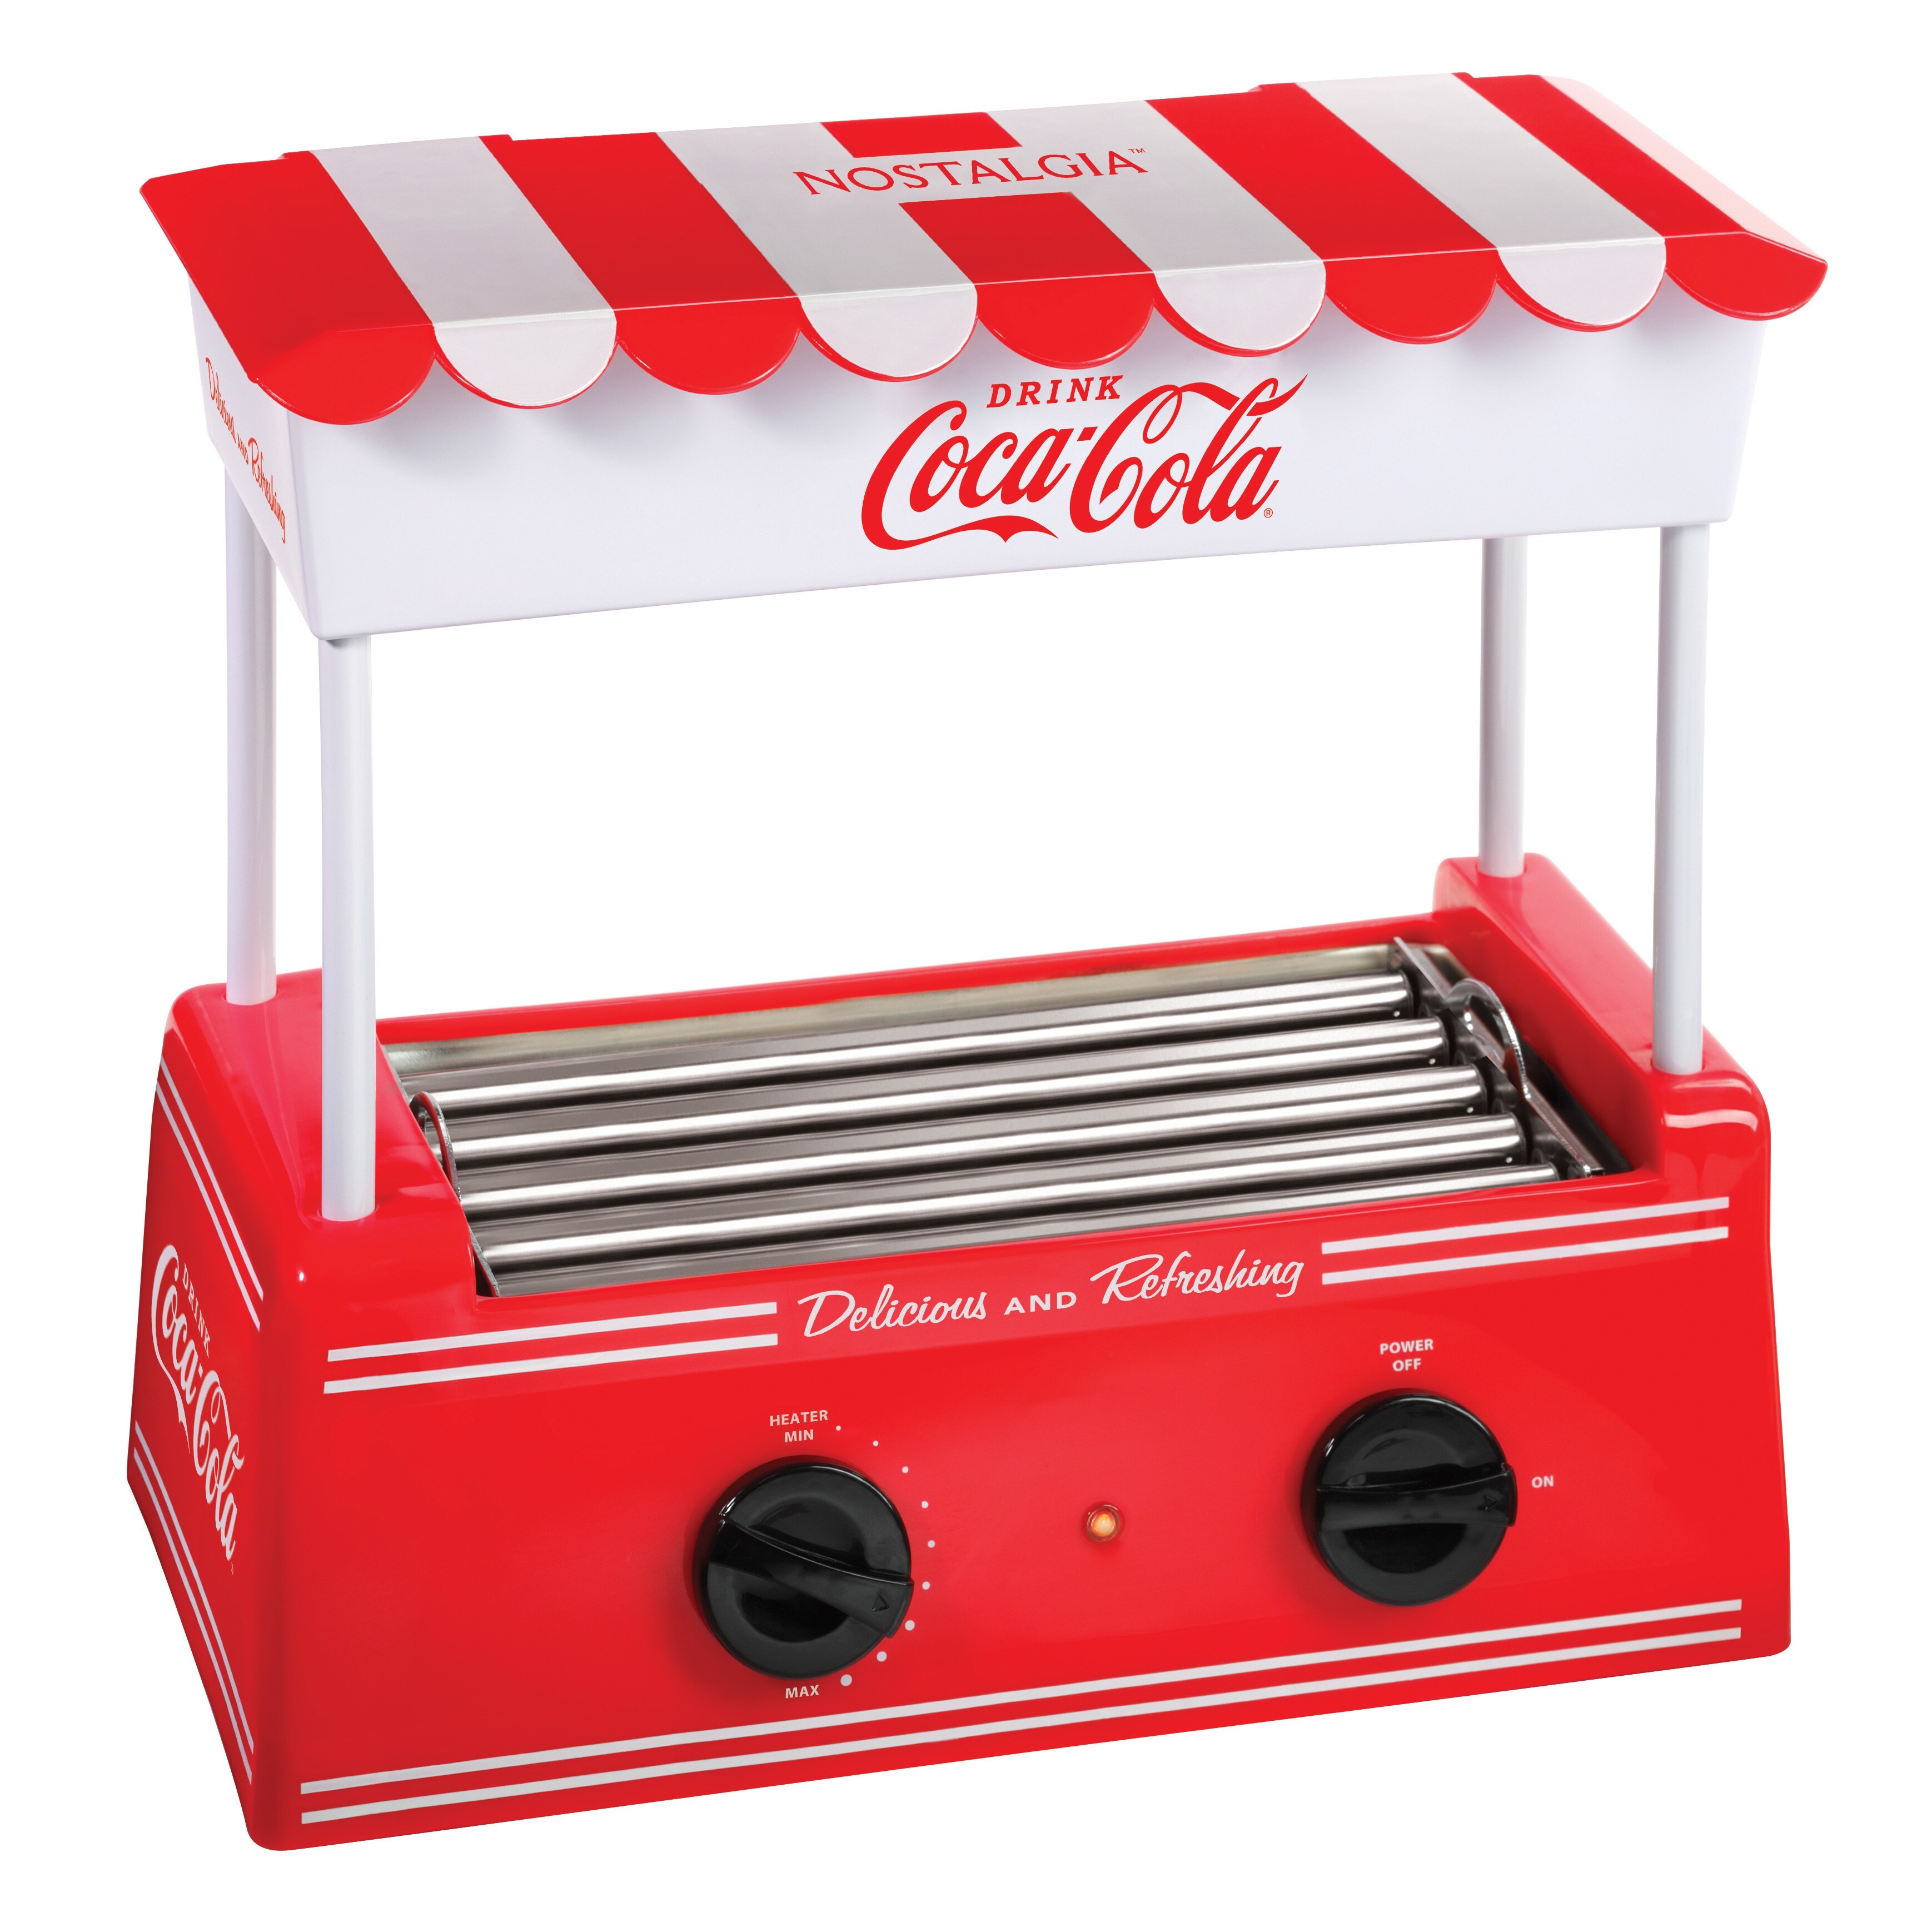 https://ak1.ostkcdn.com/images/products/is/images/direct/7f62cb05965cbe976ddb524392c785d715901695/Nostalgia-CKHDR8CR-Coca-Cola-Hot-Dog-Roller.jpg